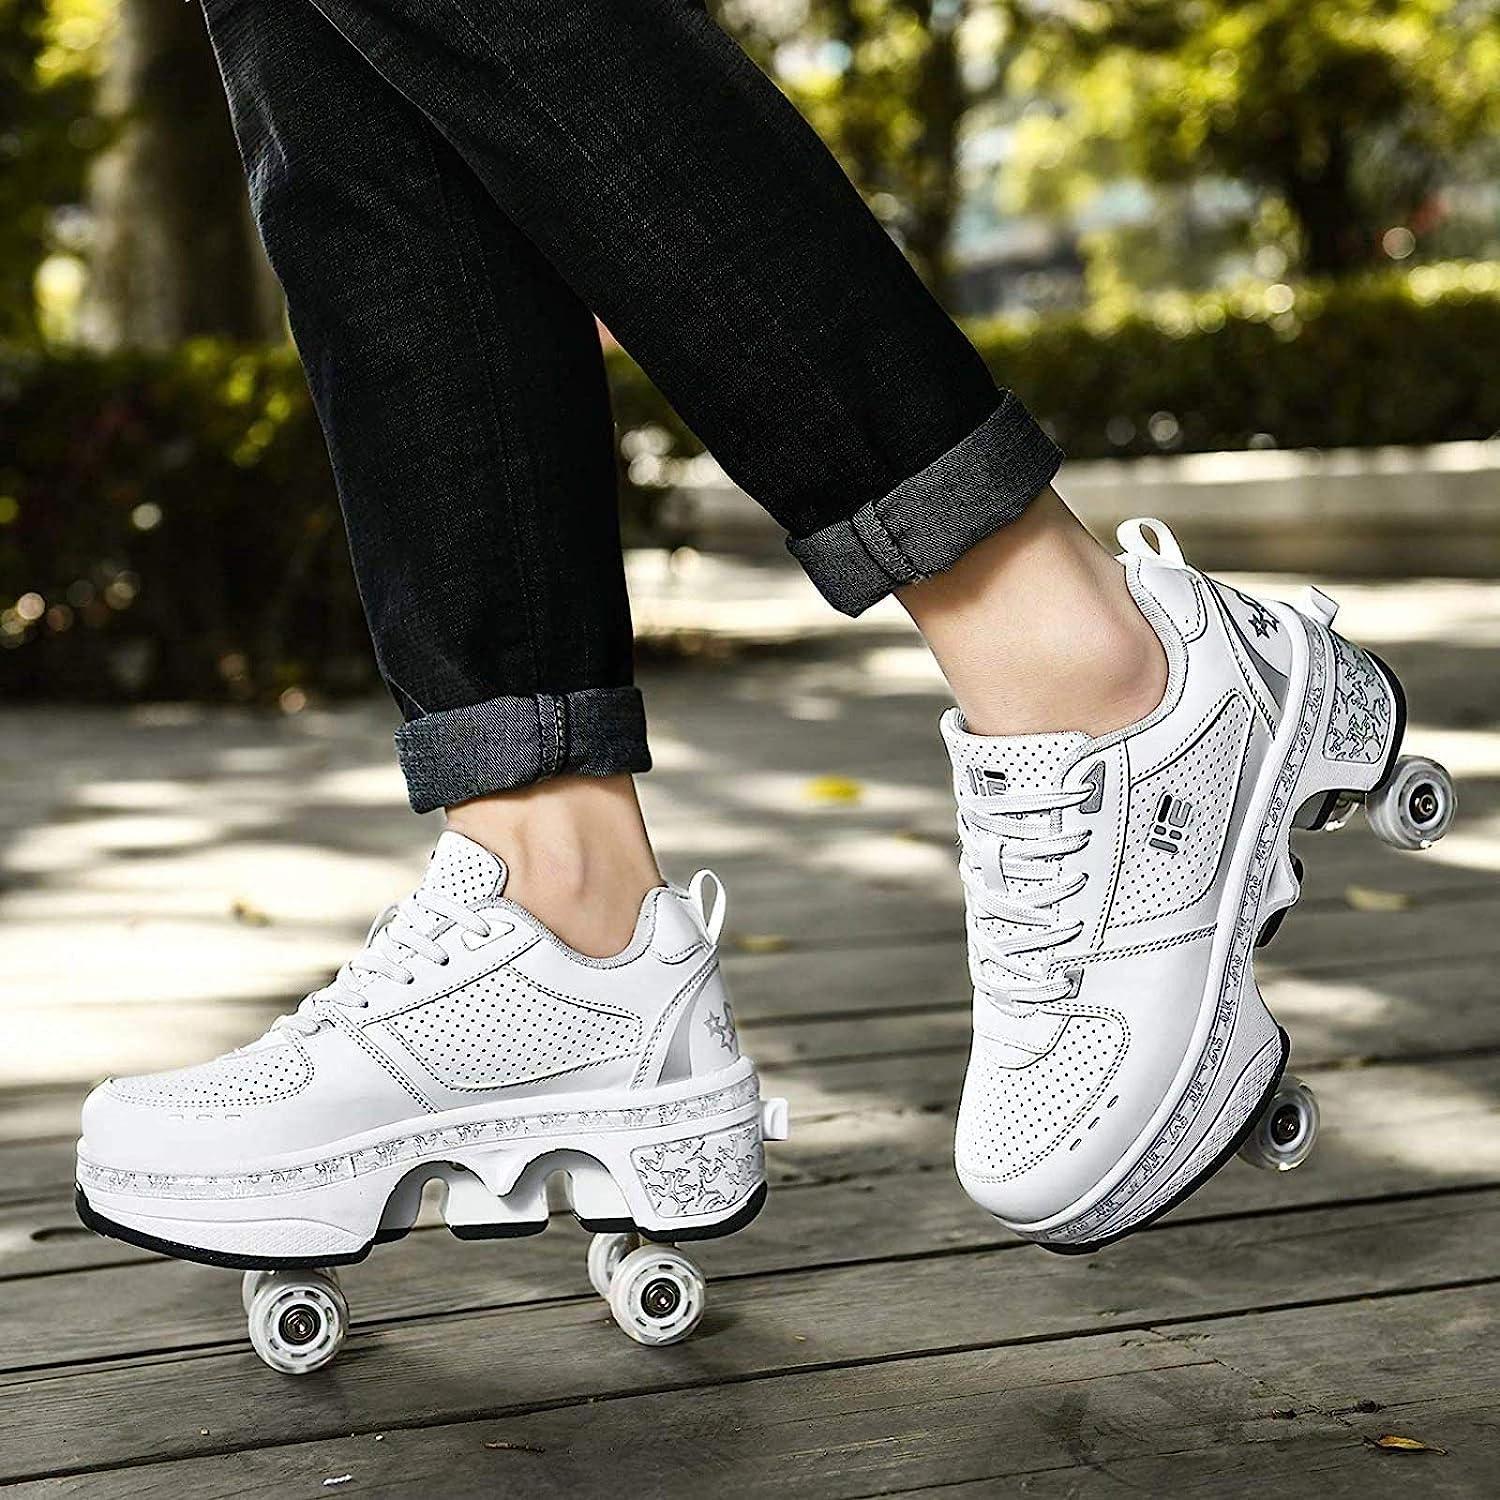 How to Choose Your Kids' Roller Skates